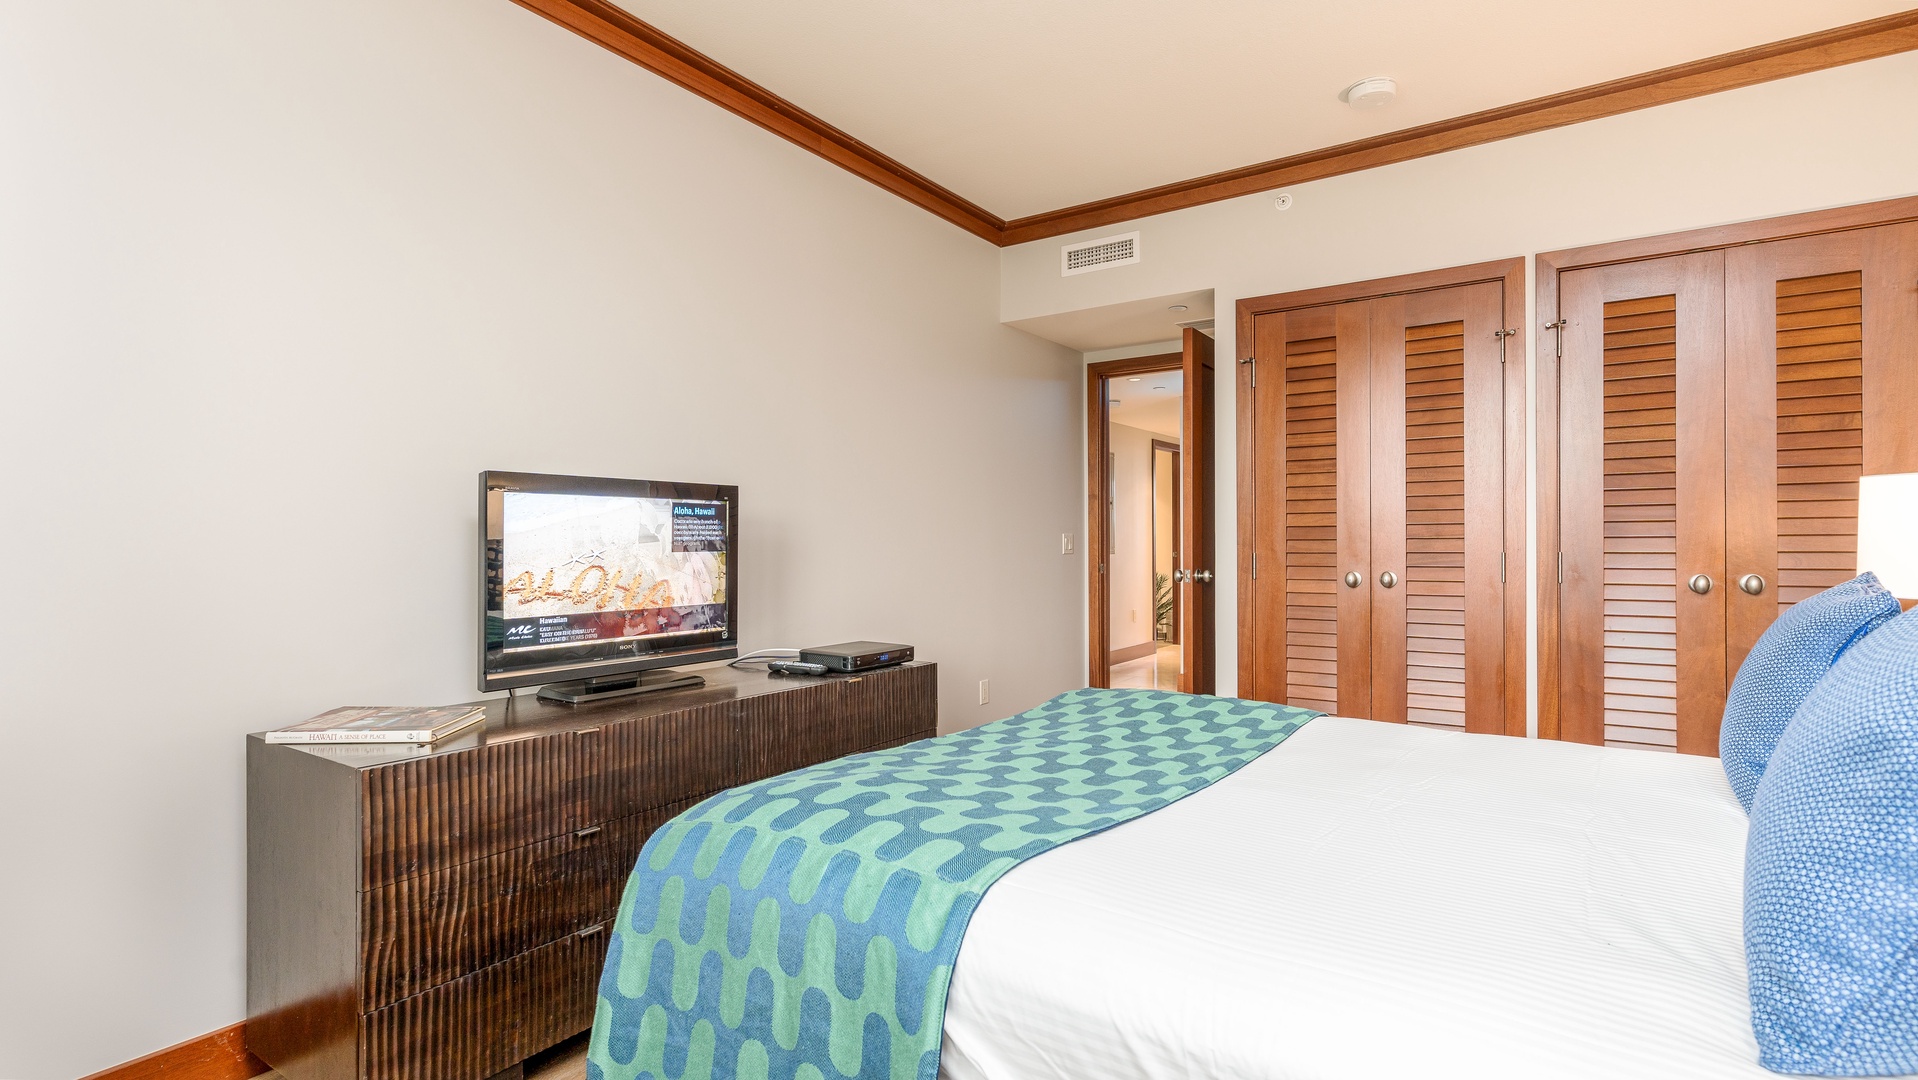 Kapolei Vacation Rentals, Ko Olina Beach Villas O305 - Shared guest bedroom with a TV and dresser.